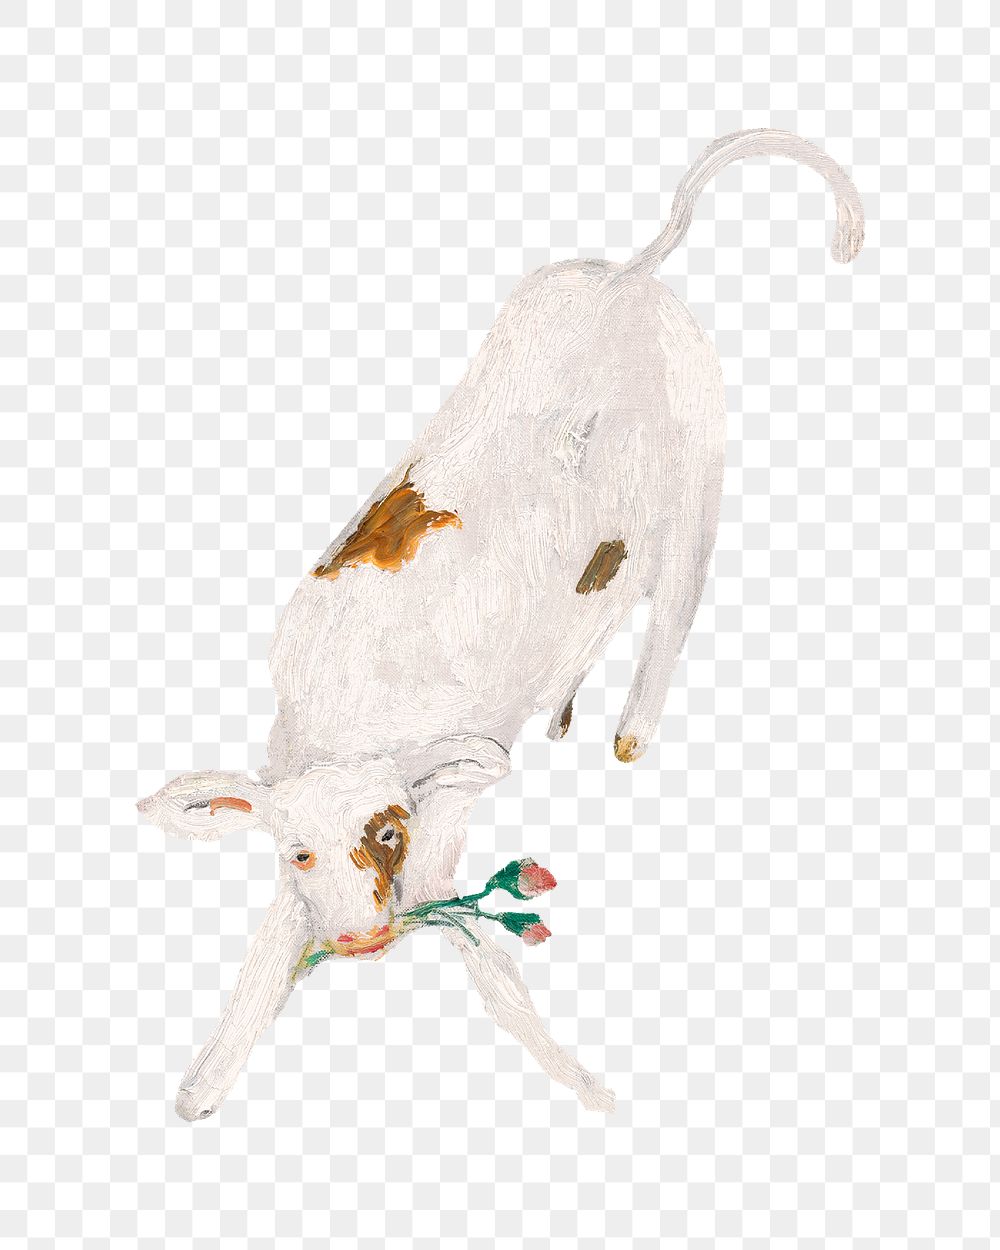 Calf png baby cow, animal illustration by Cyprian Majernik on transparent background. Remixed by rawpixel.